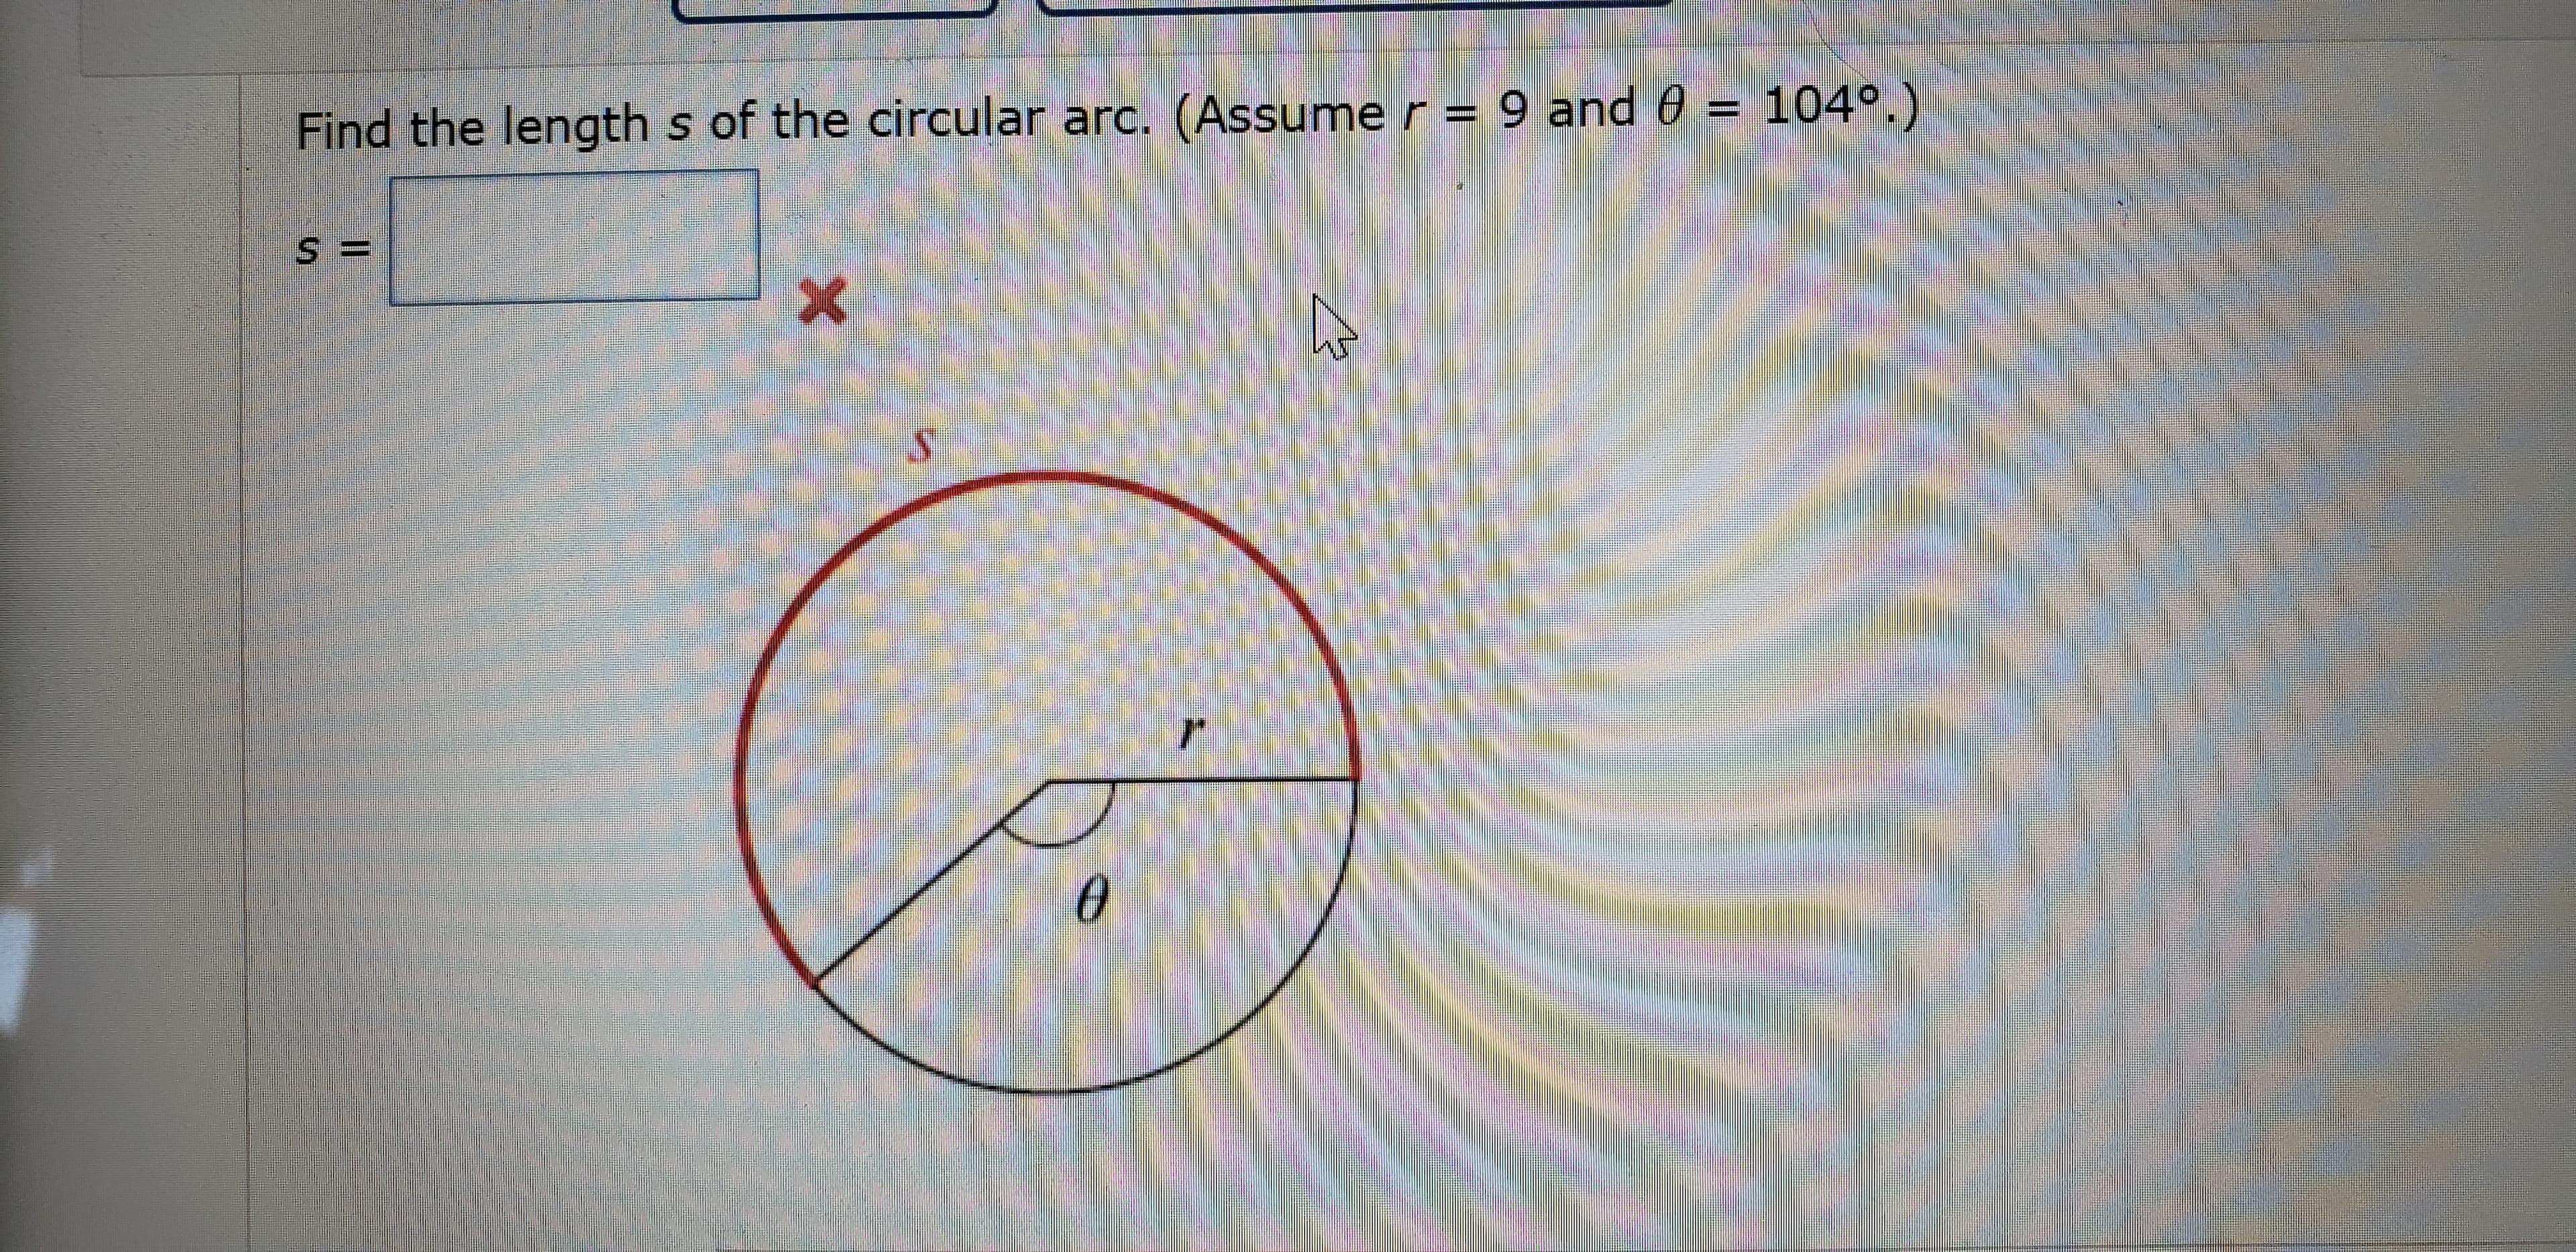 Find the length s of the circular arc. (Assume r = 9 and 0 = 104°.)
